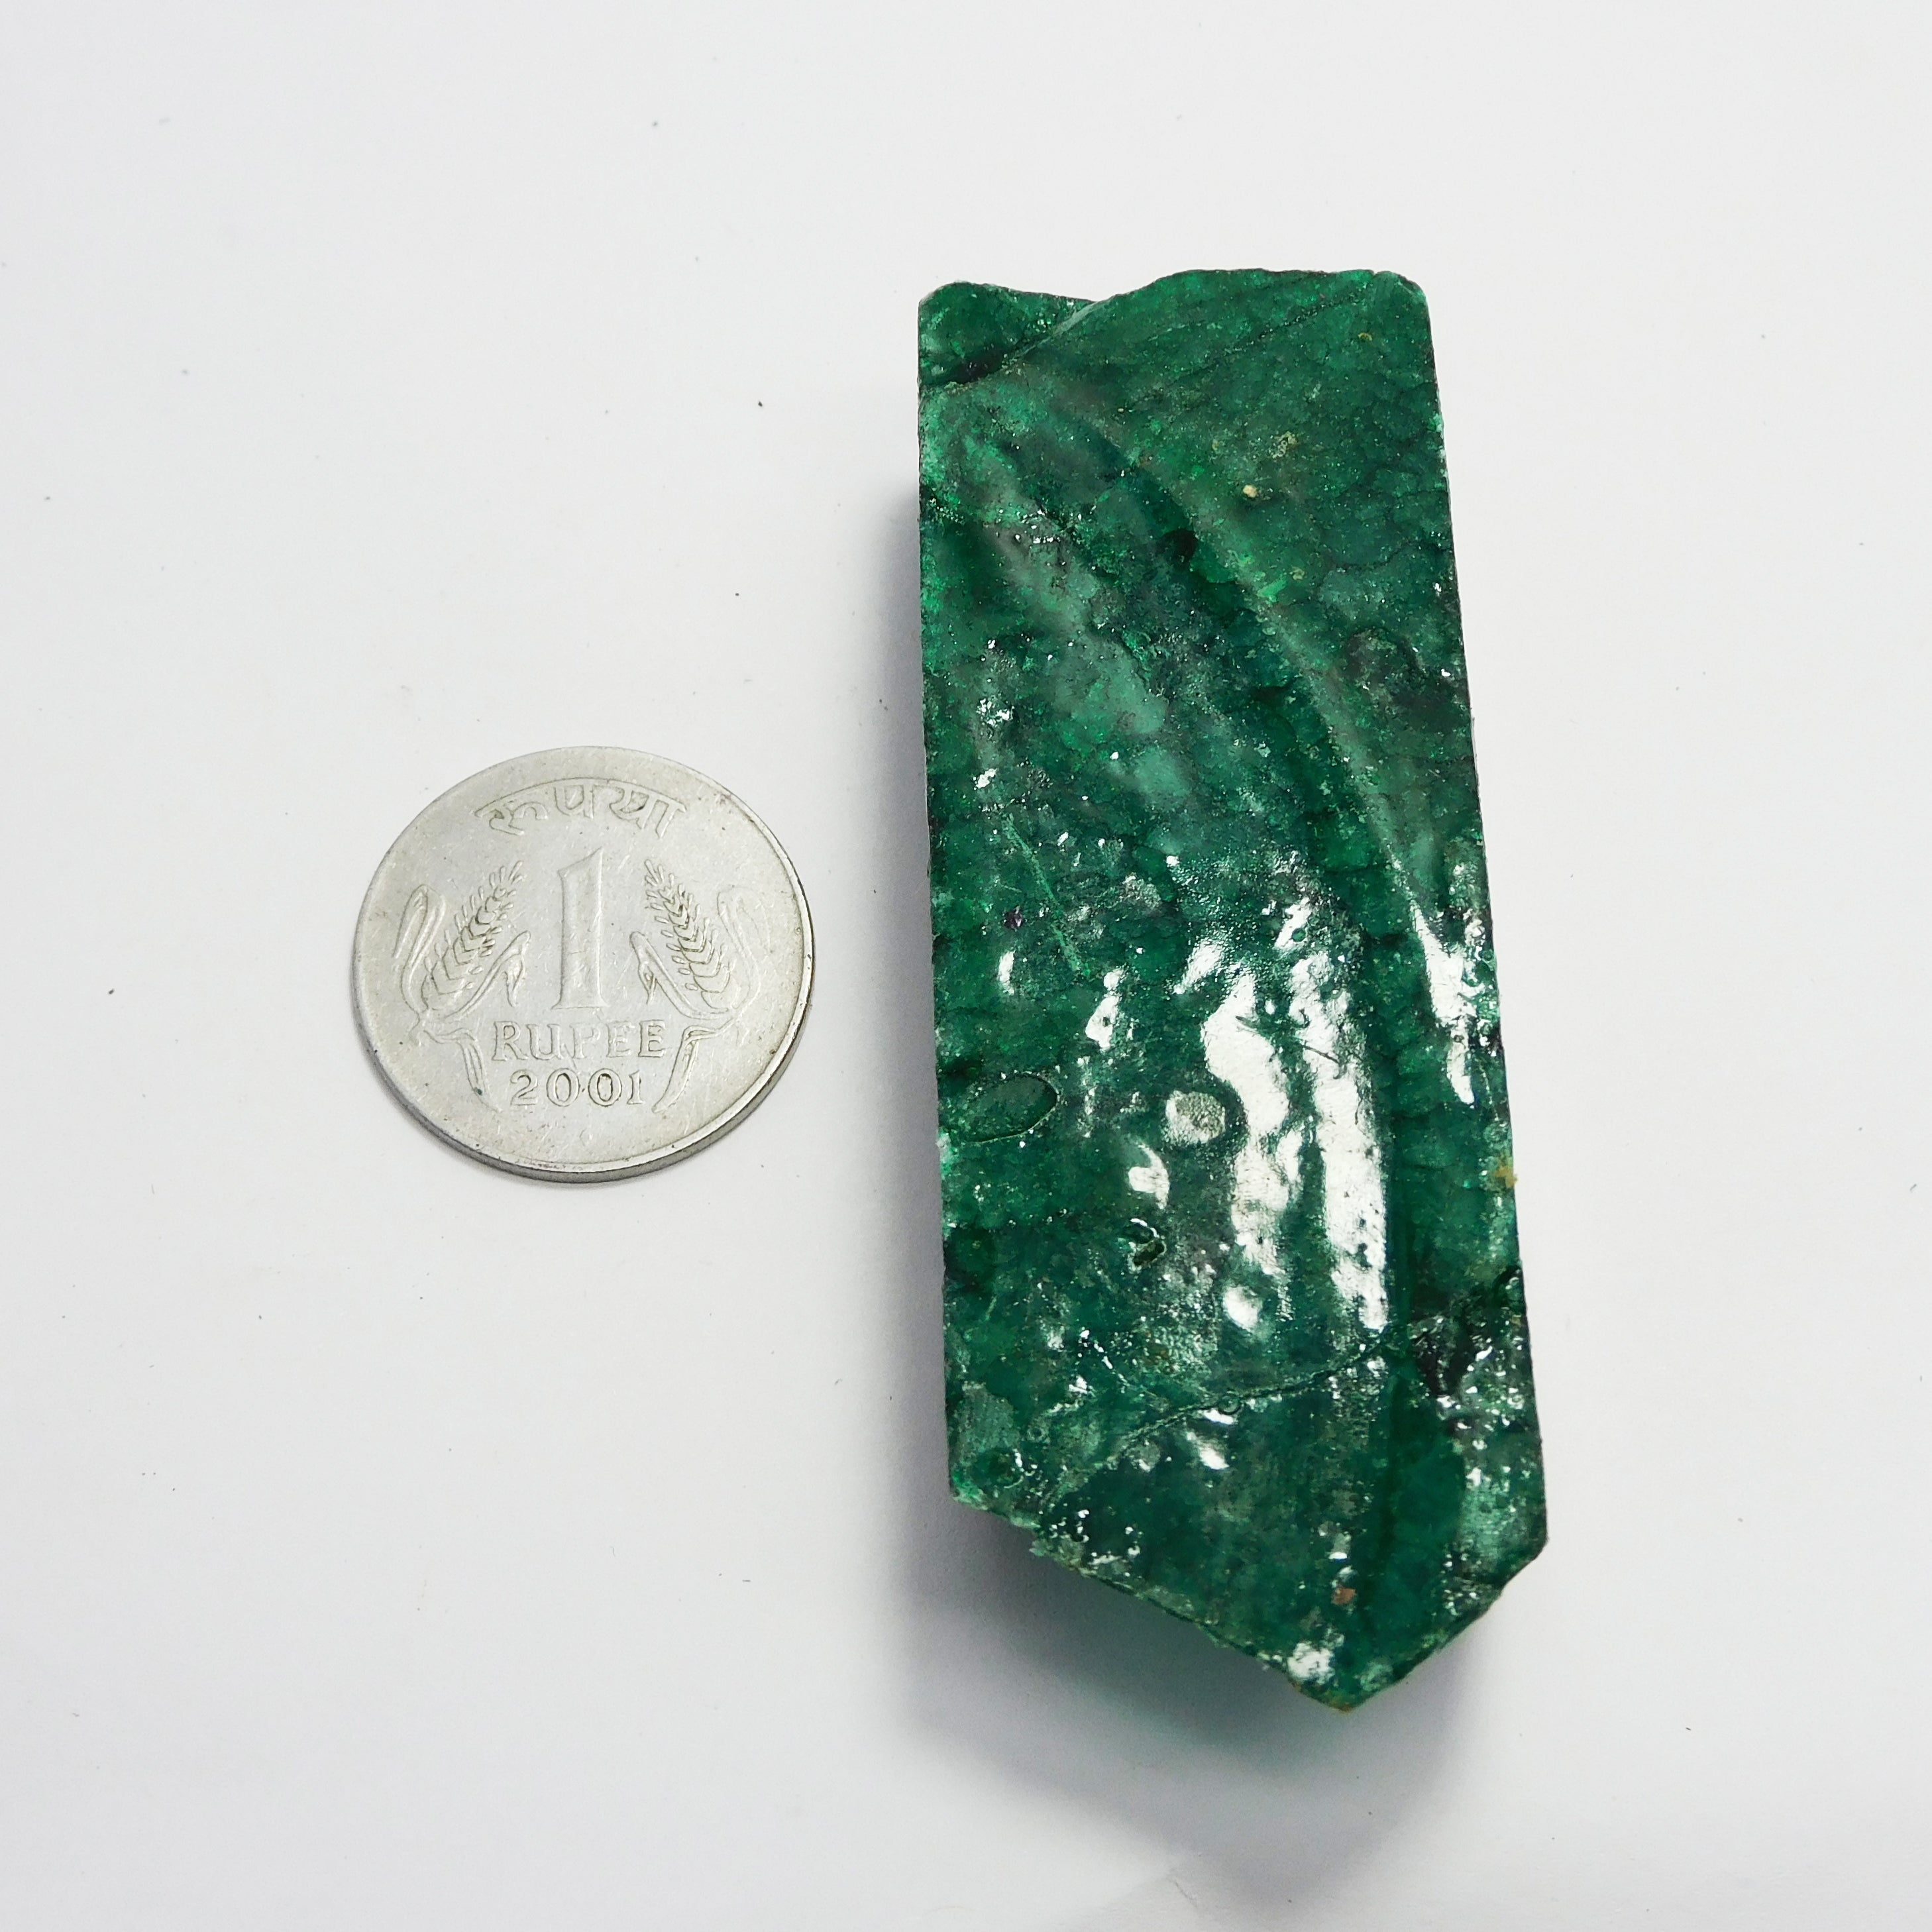 Green Natural Emerald Rough 499.95 Carat CERTIFIED Loose Gemstone Uncut Rough | Free Delivery Free Gift | Best Price